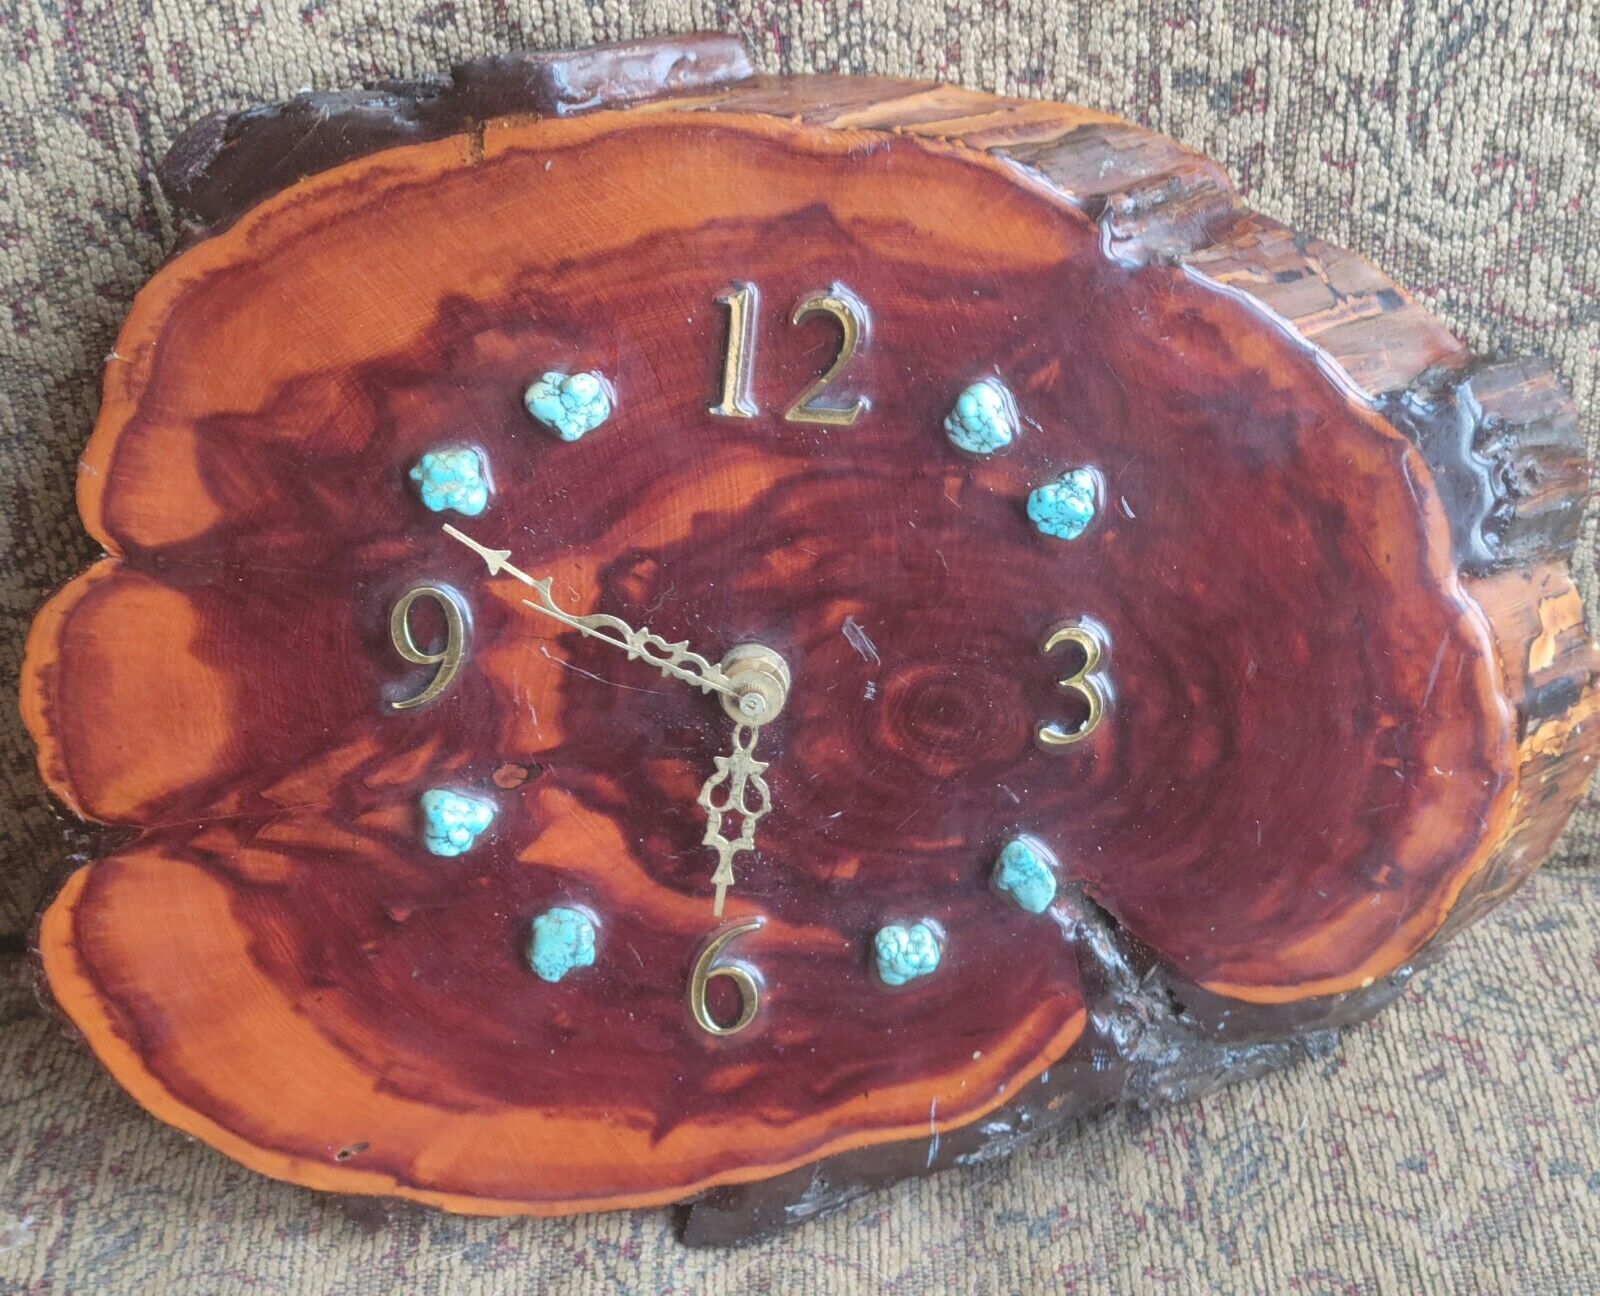 Rare Vintage Natural Live Edge Wood Slab Wall Clock Handcrafted with Turquoise